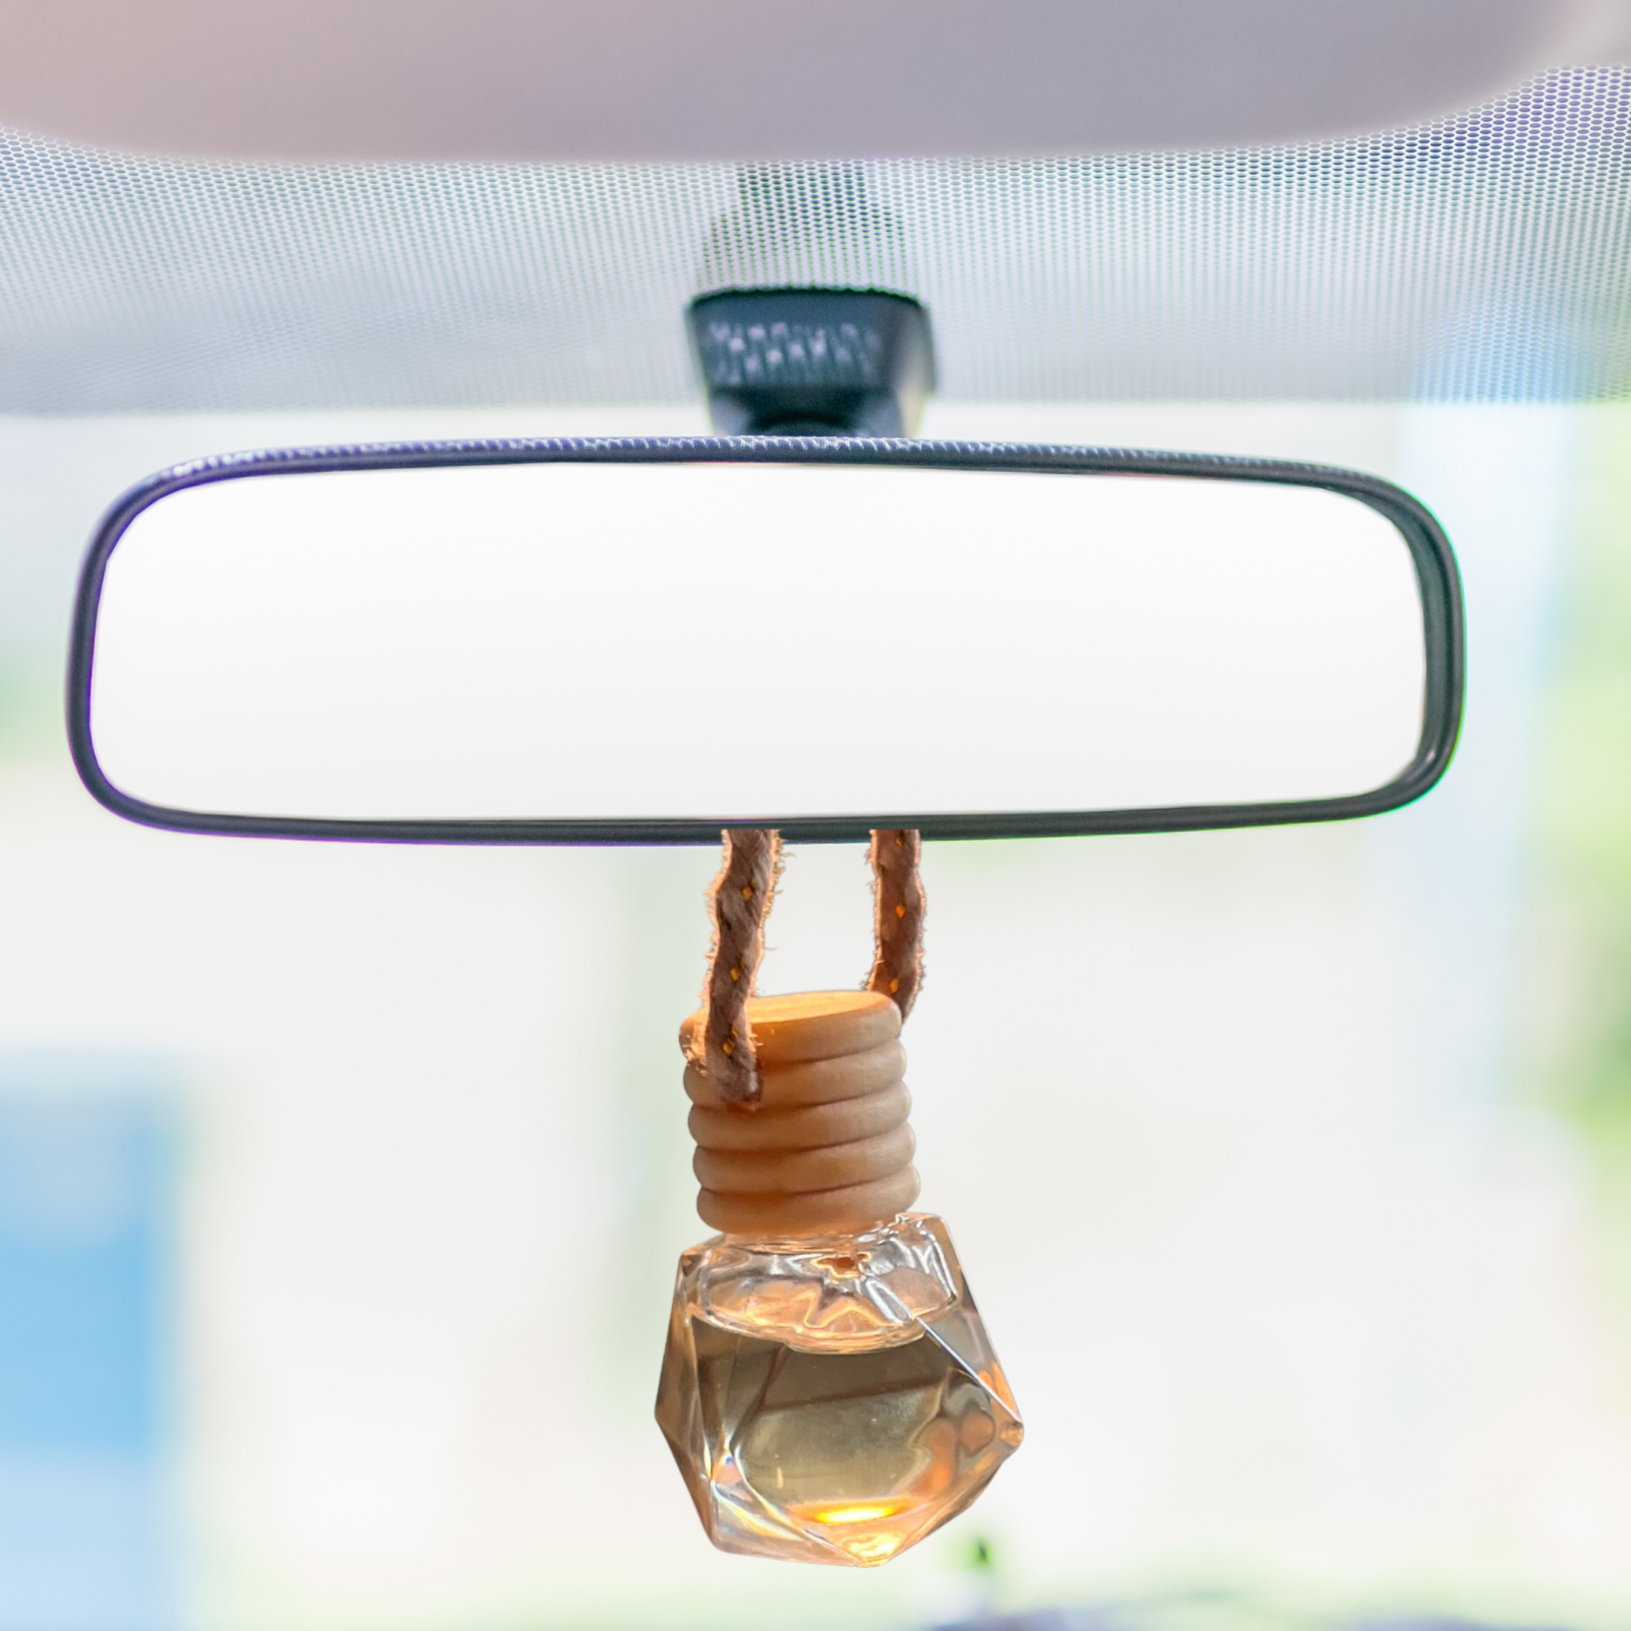 car air freshener diffuser to hang from rearview. a tiny rope, attaches a tiny glass jar filled with pure essenTIAL OIL